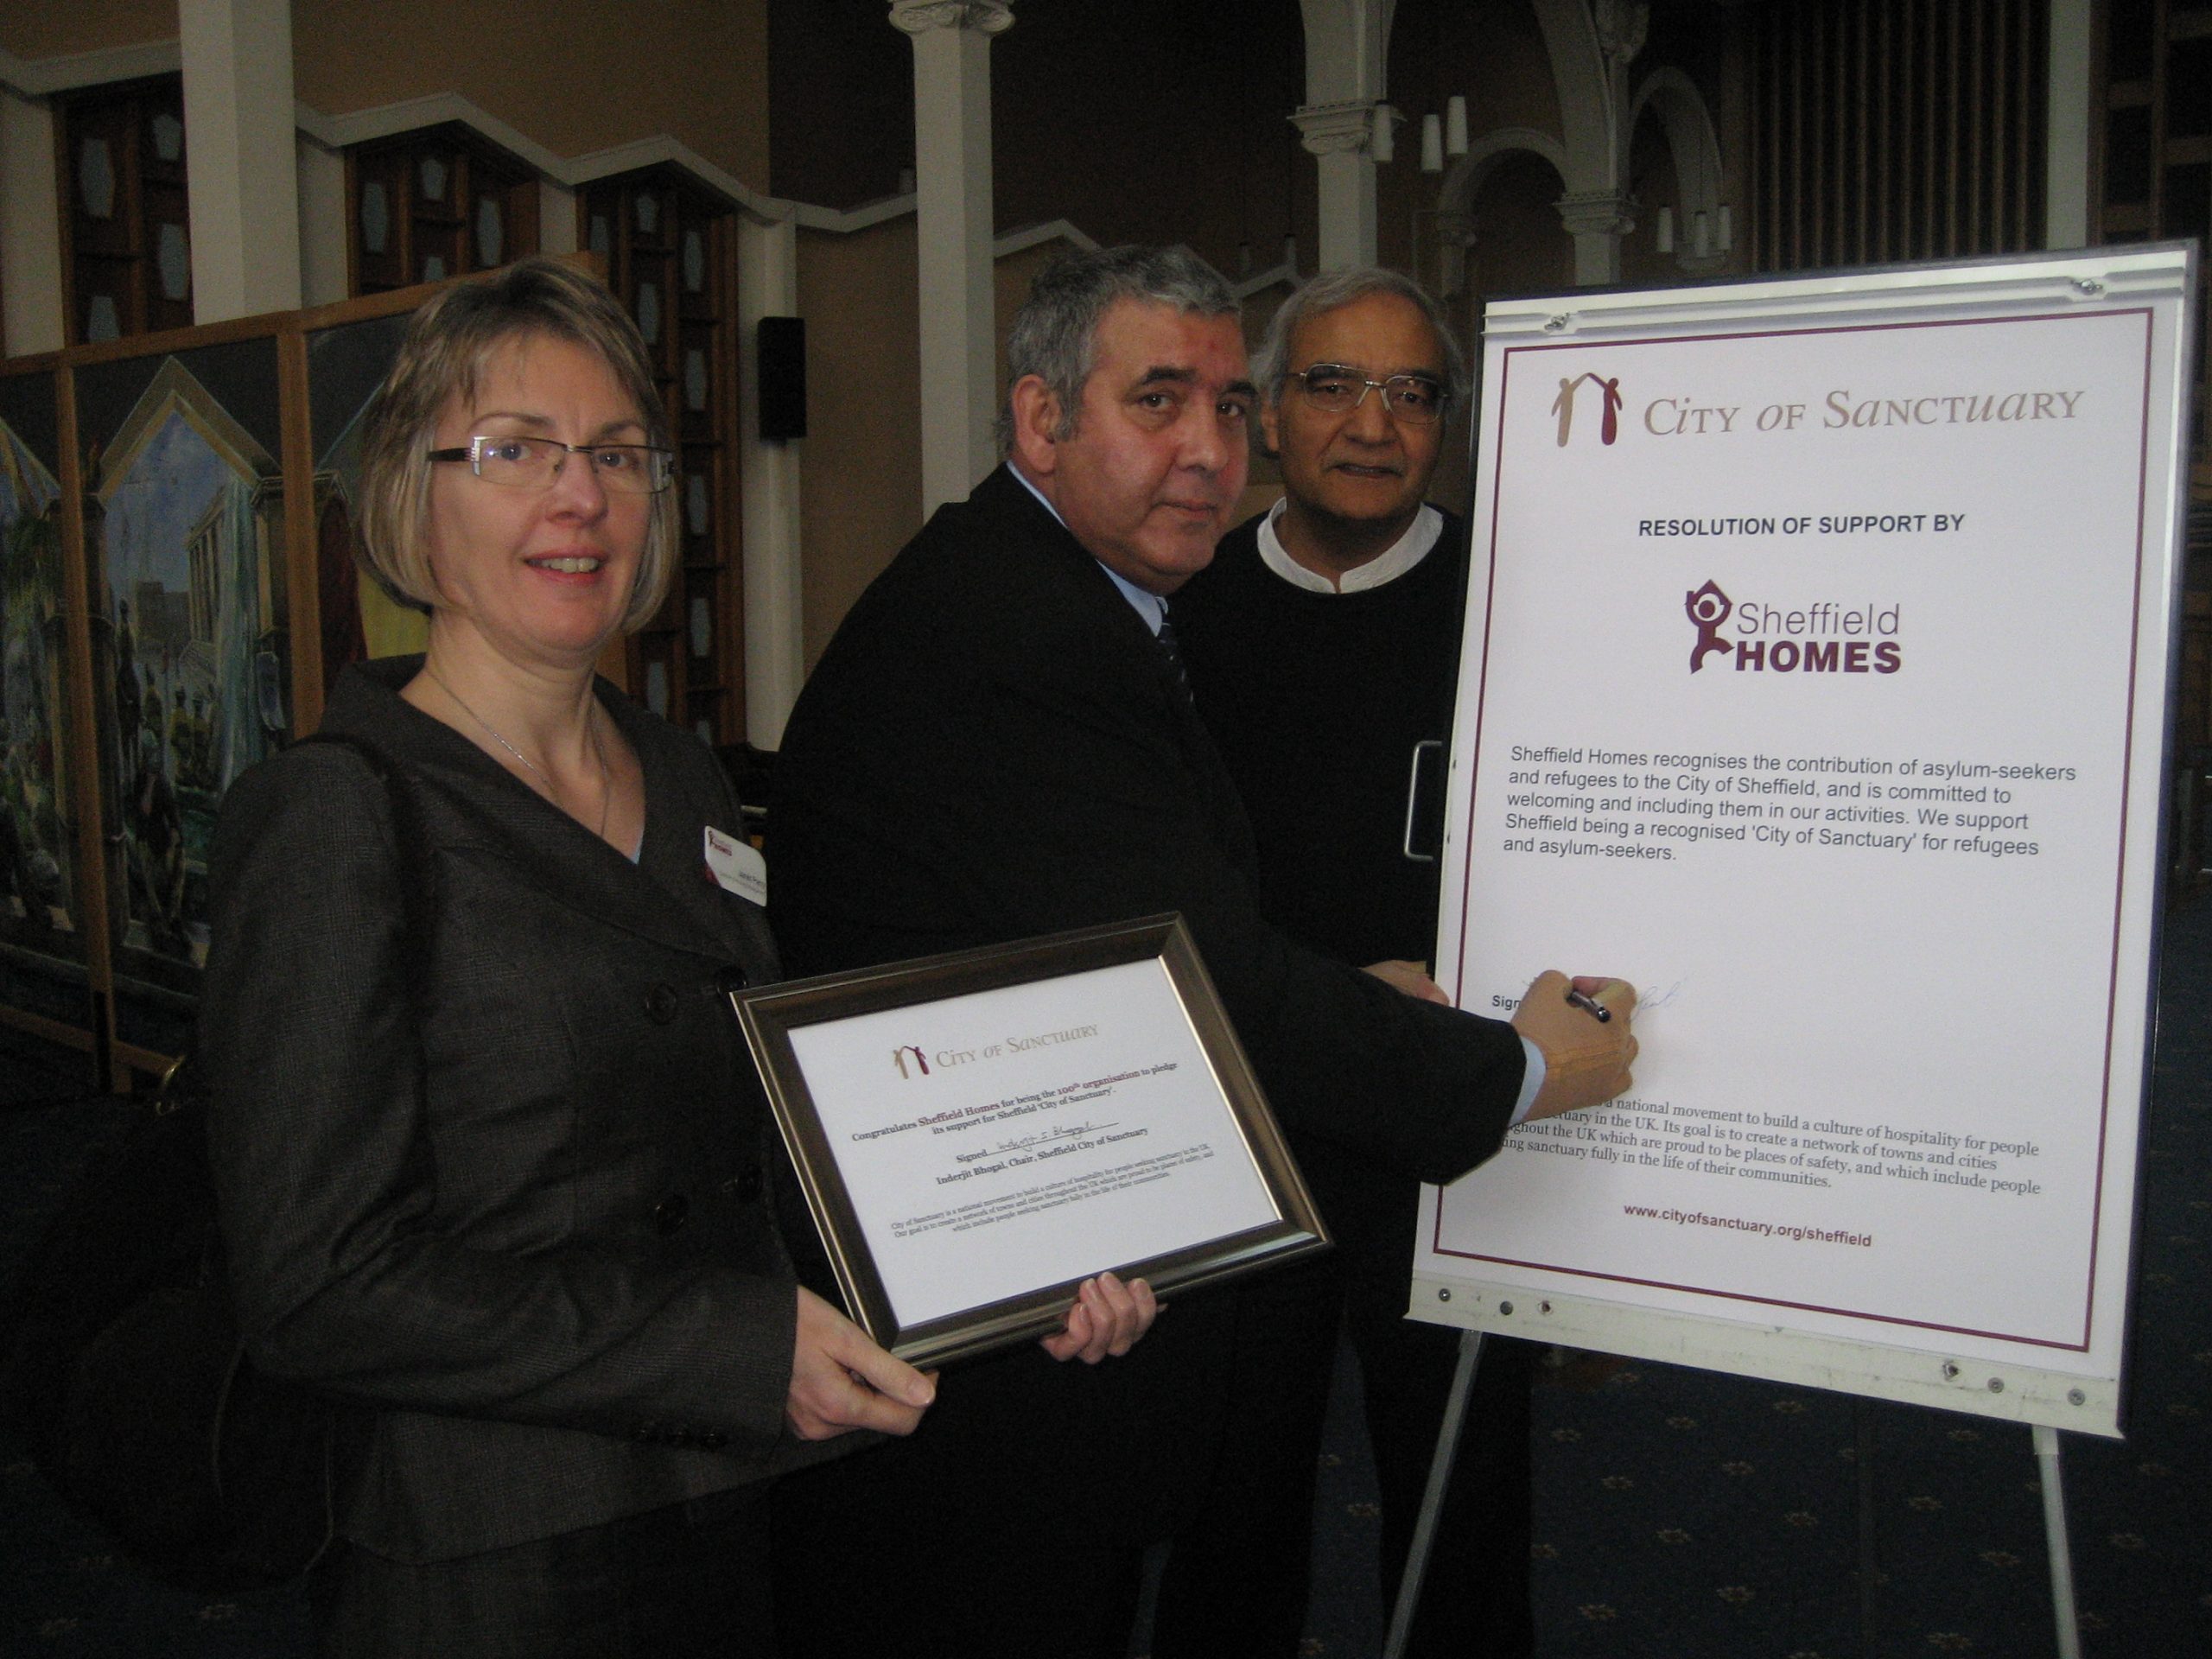 Sheffield Homes 100th Signatory to City of Sanctuary in Sheffield